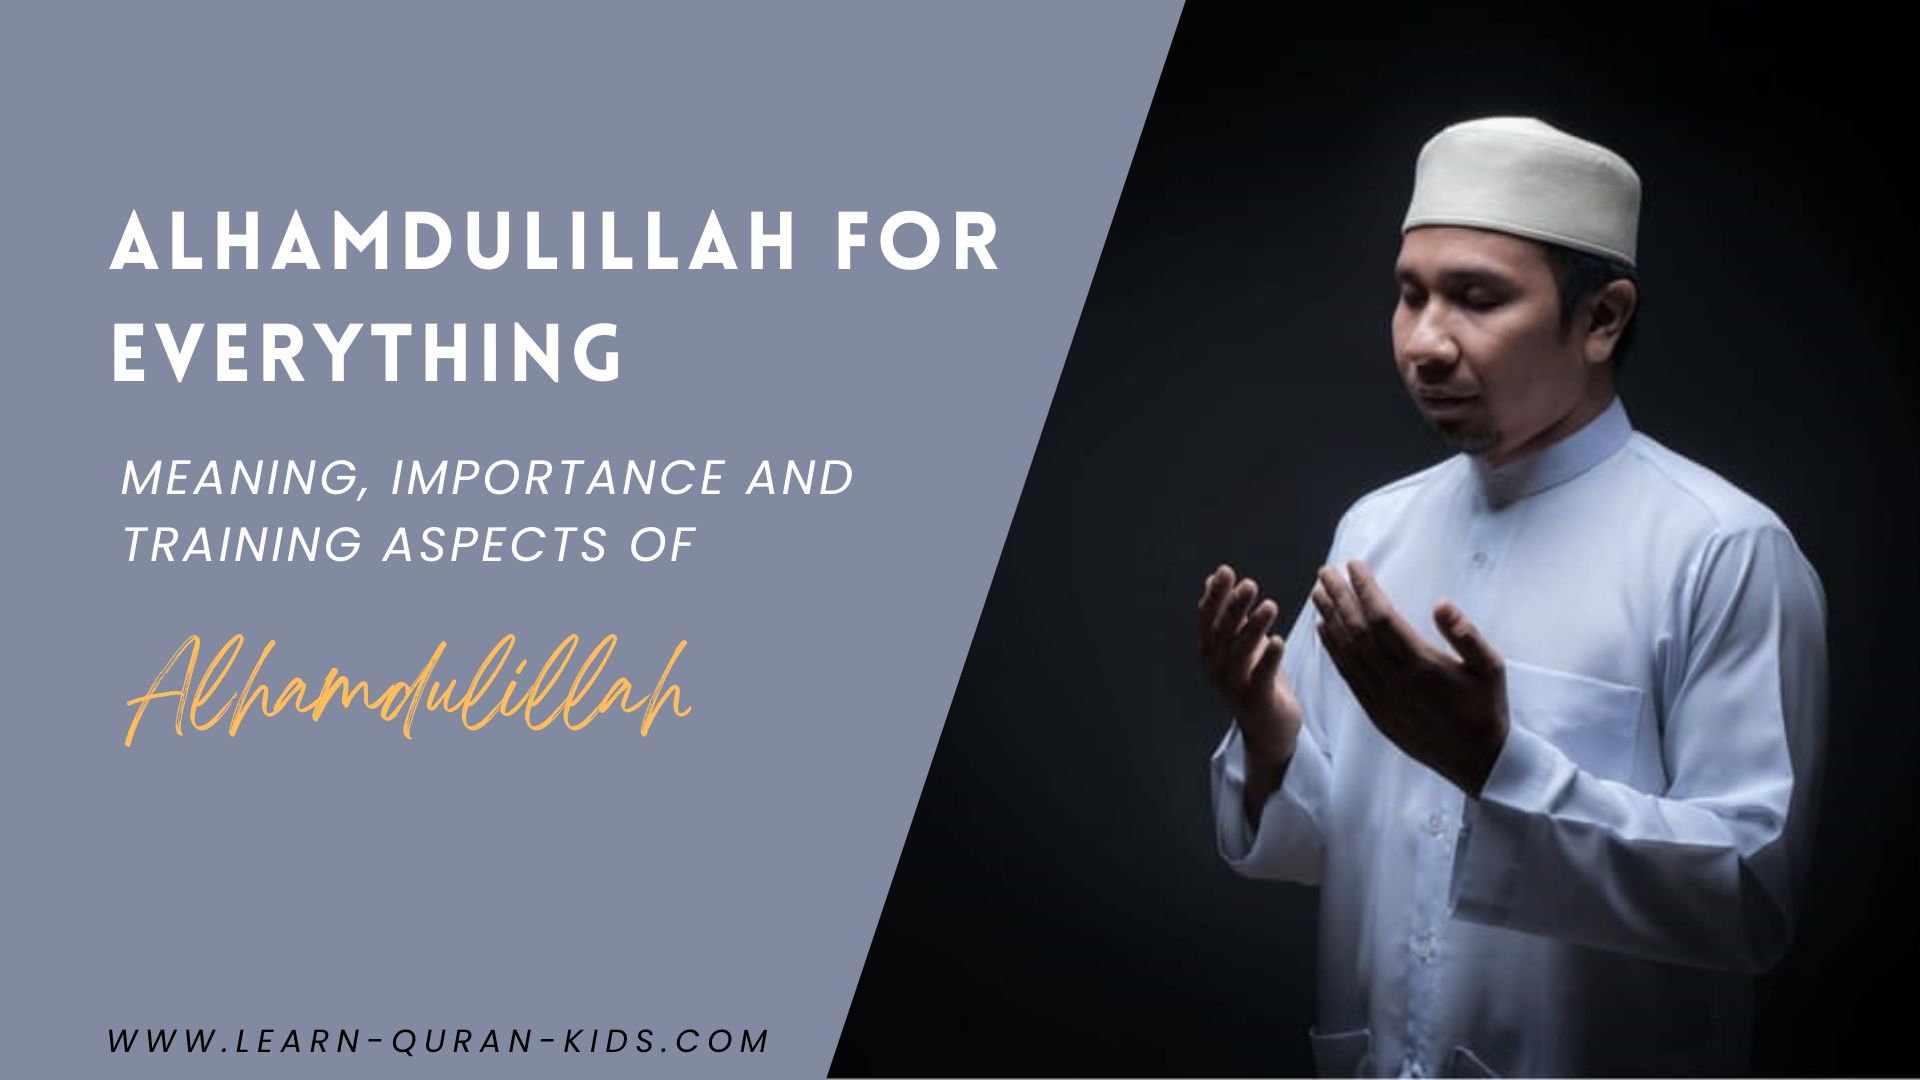 Alhamdulillah For Everything – Meaning, Importance and Training Aspects of Alhamdulillah